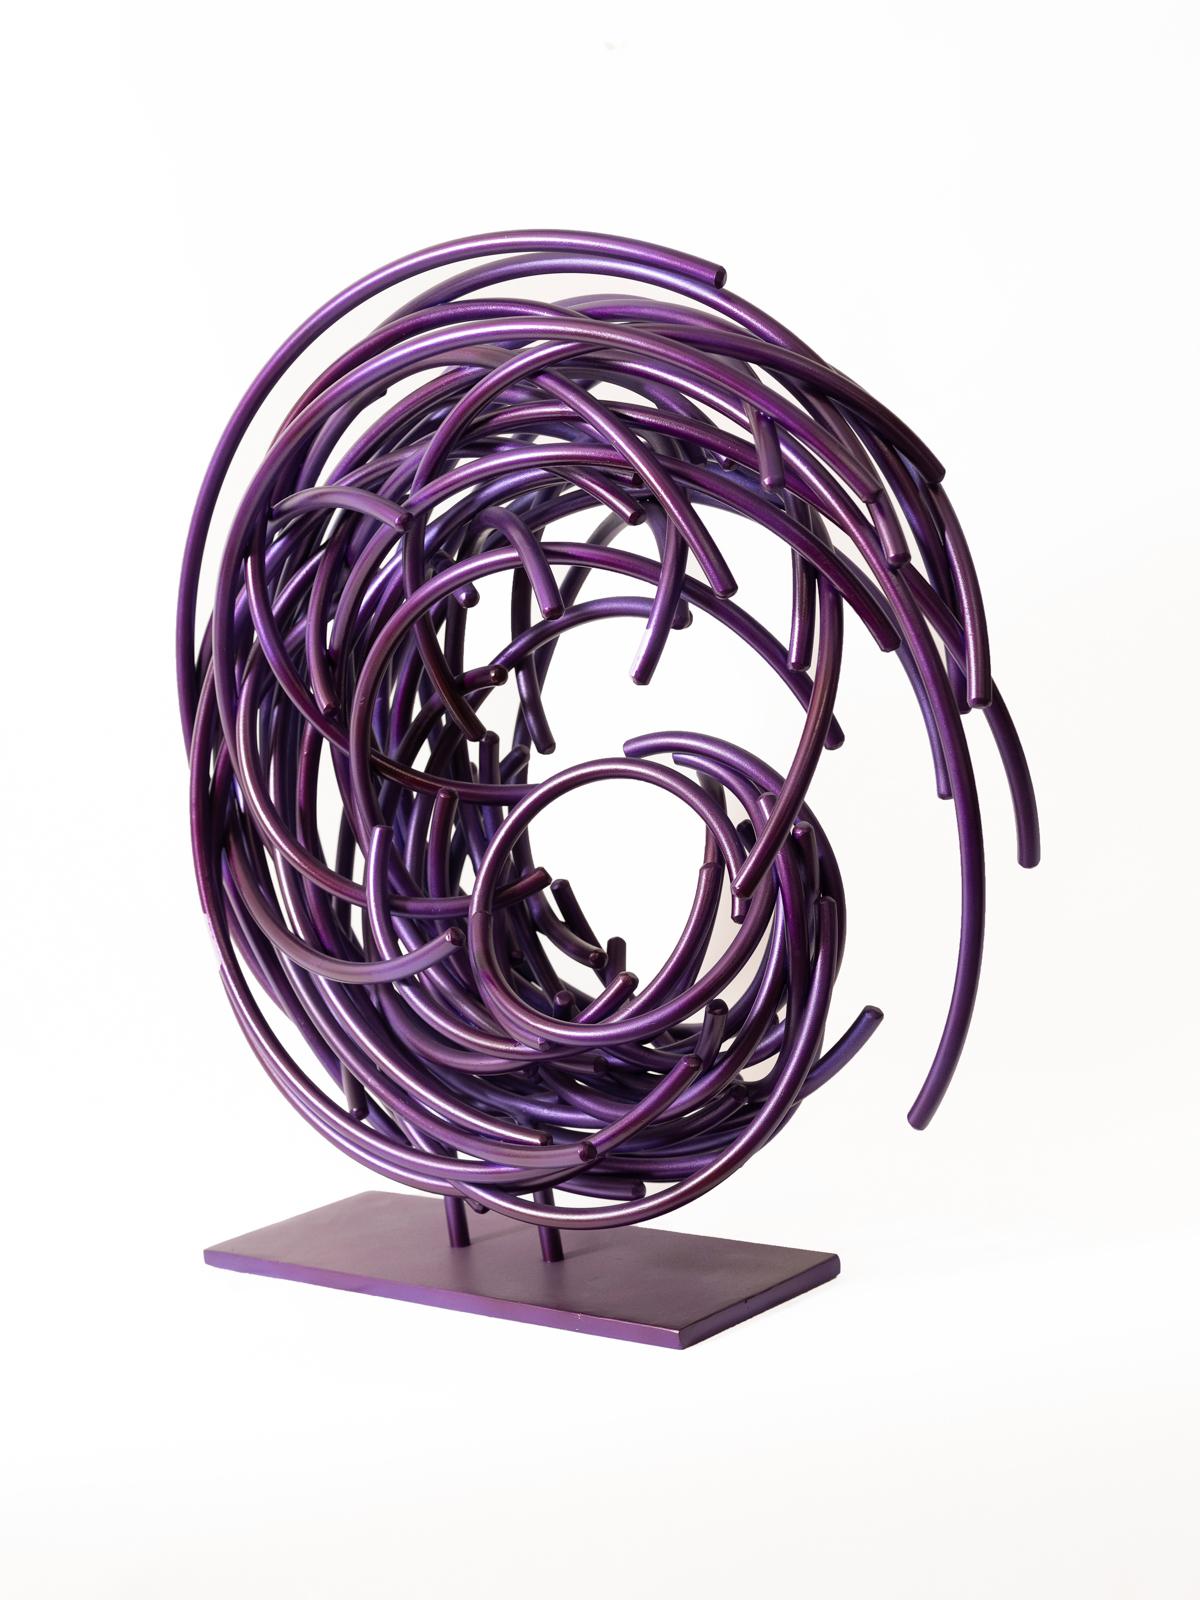 Maelstrom Series No 5 - layered, intersecting, forged aluminum sculpture - Contemporary Sculpture by Shayne Dark